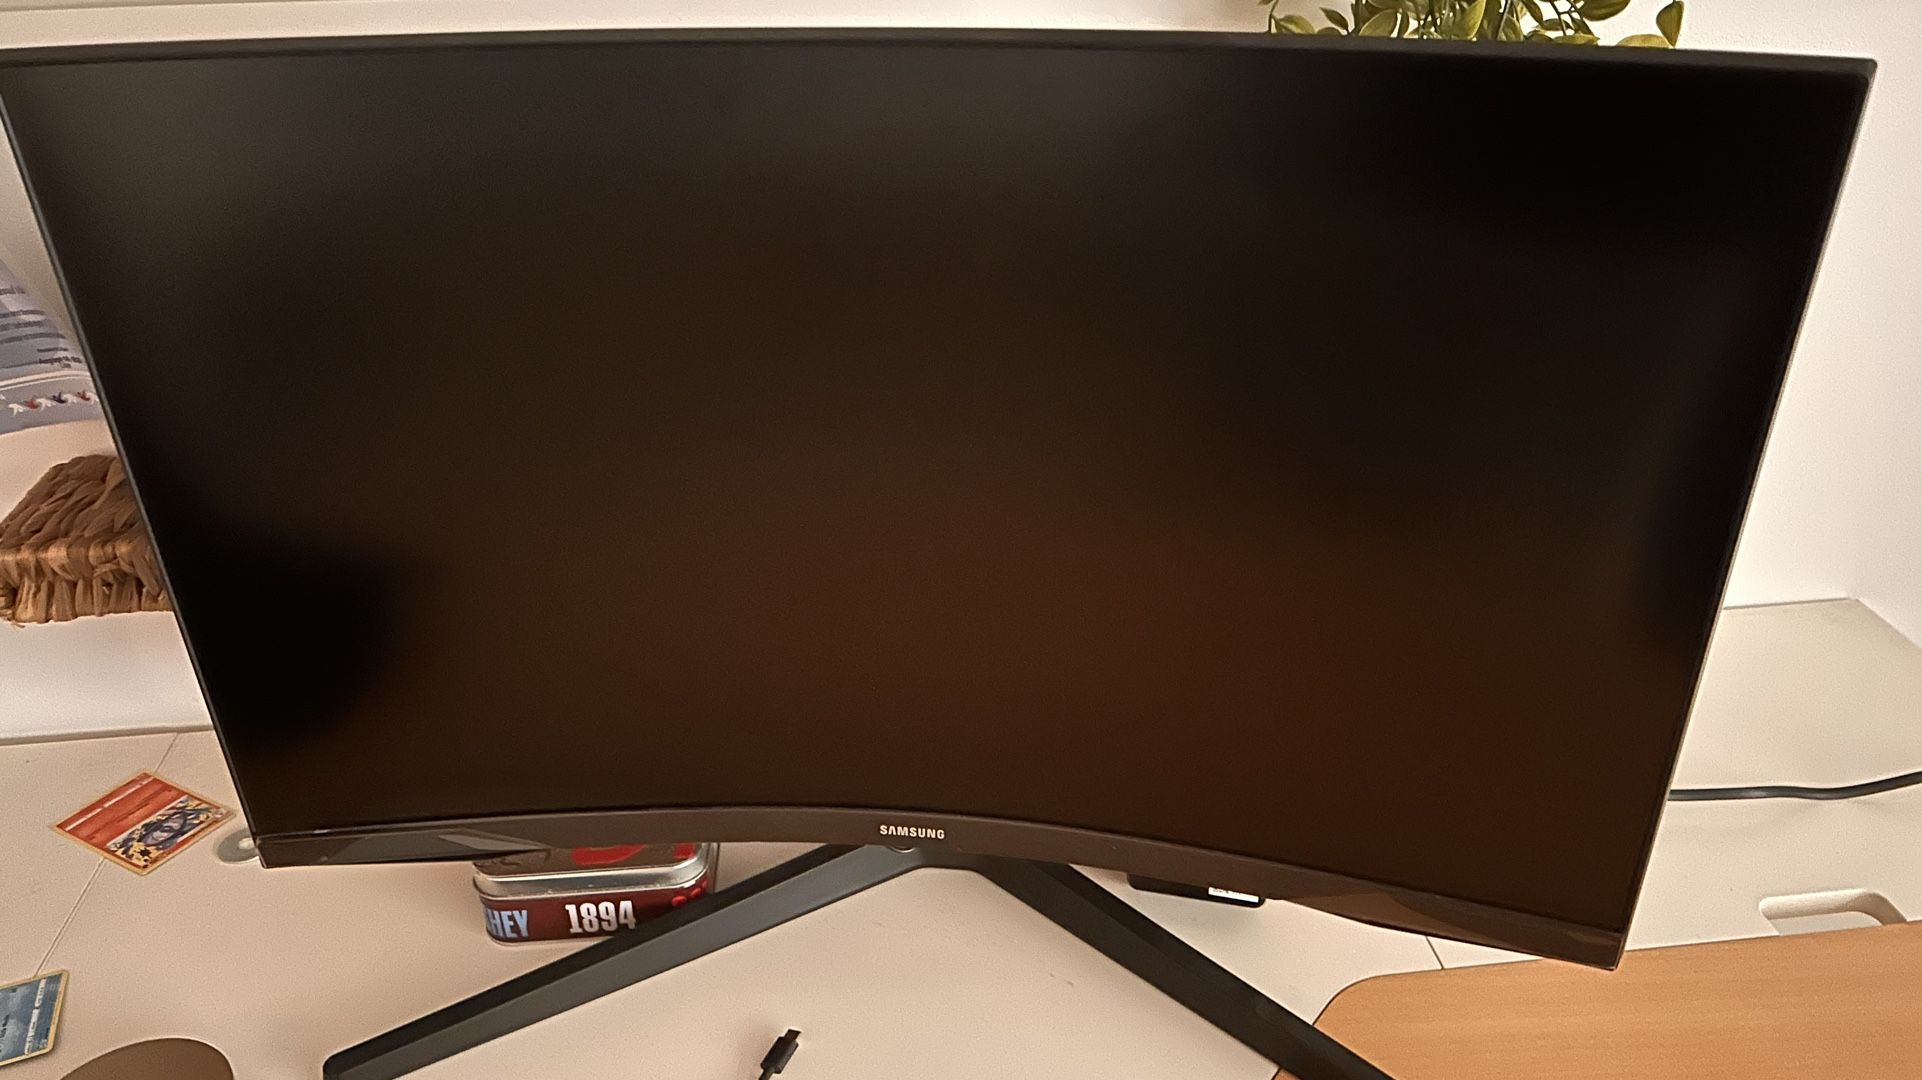 SAMSUNG Odyssey G5 Series 27-Inch WQHD (2560x1440) Gaming Monitor, 144Hz,  Curved, 1ms, HDMI, Display Port, FreeSync Premium (LC27G55TQWNXZA) for Sale  in Ramsey, NJ OfferUp